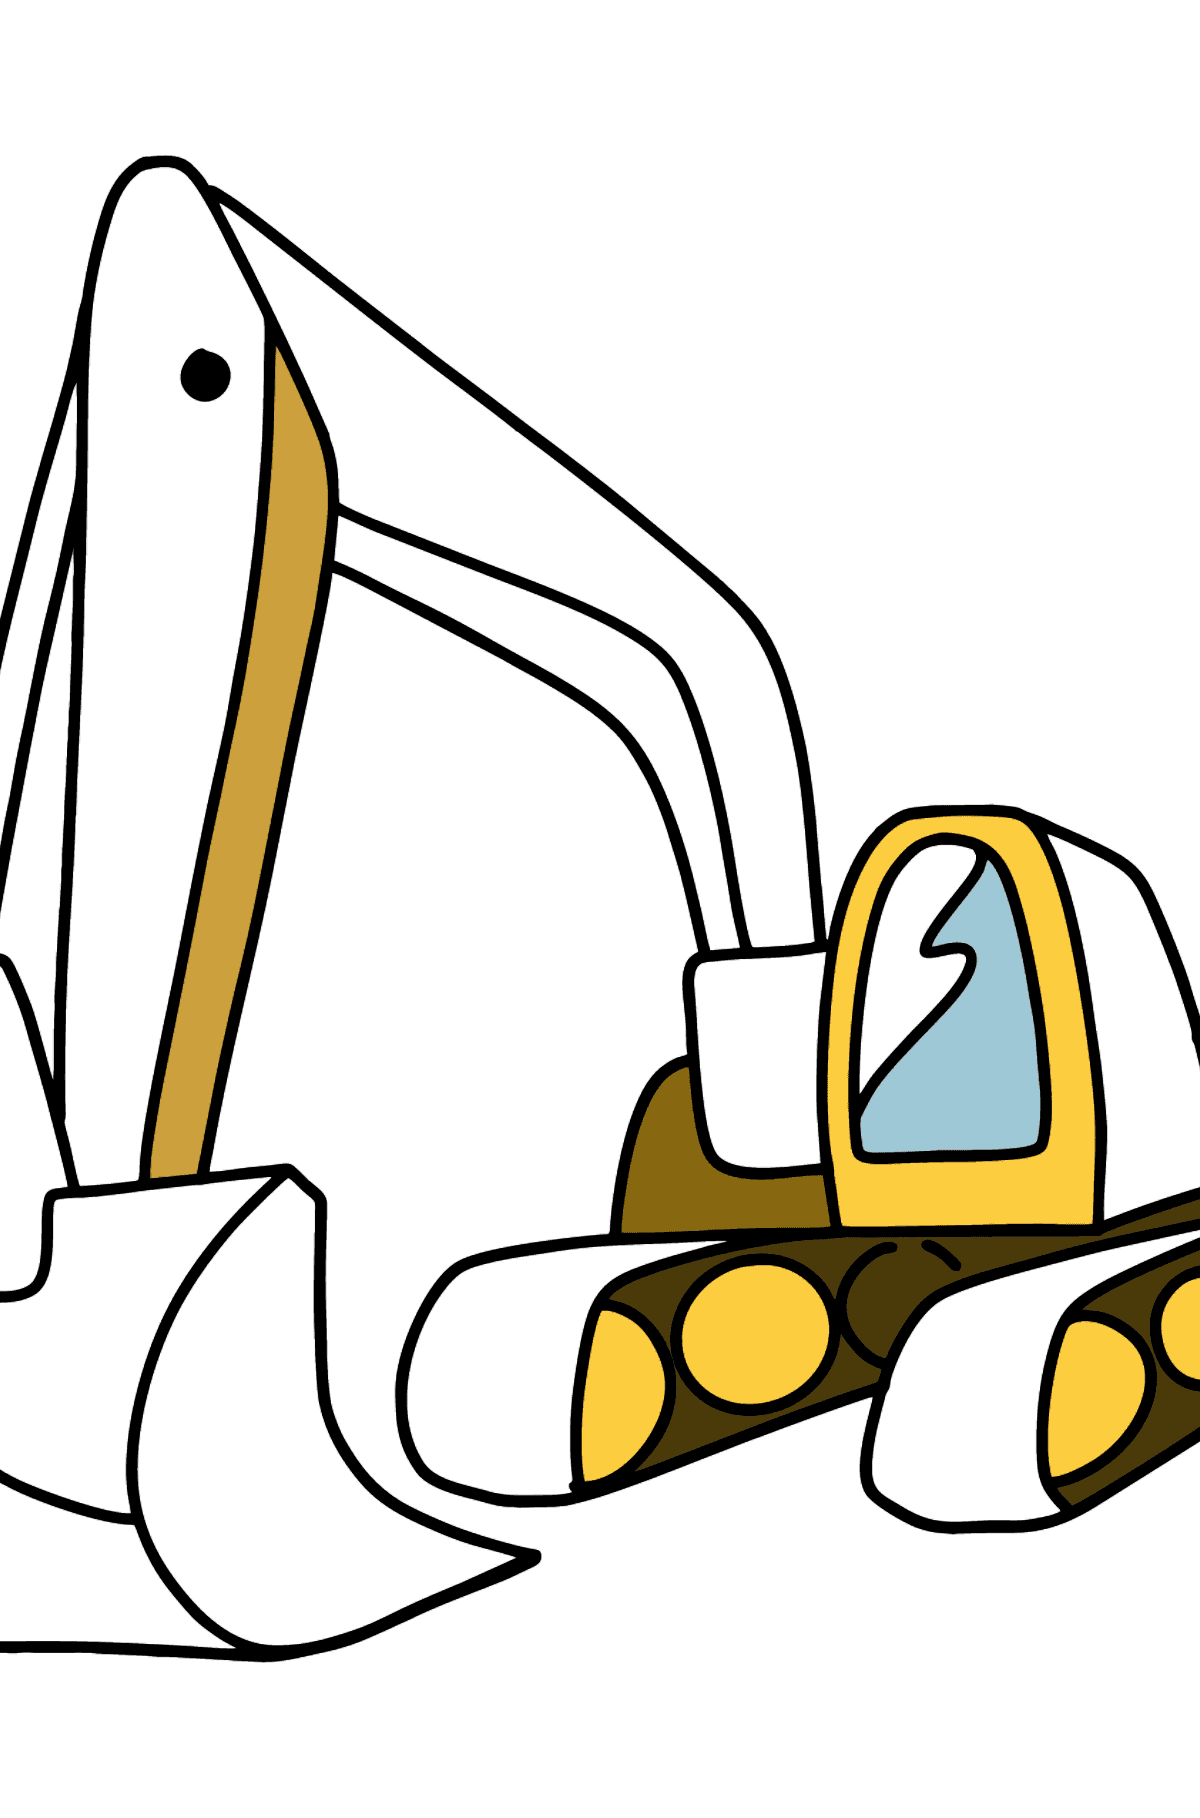 Tractor Excavator coloring page - Coloring Pages for Kids